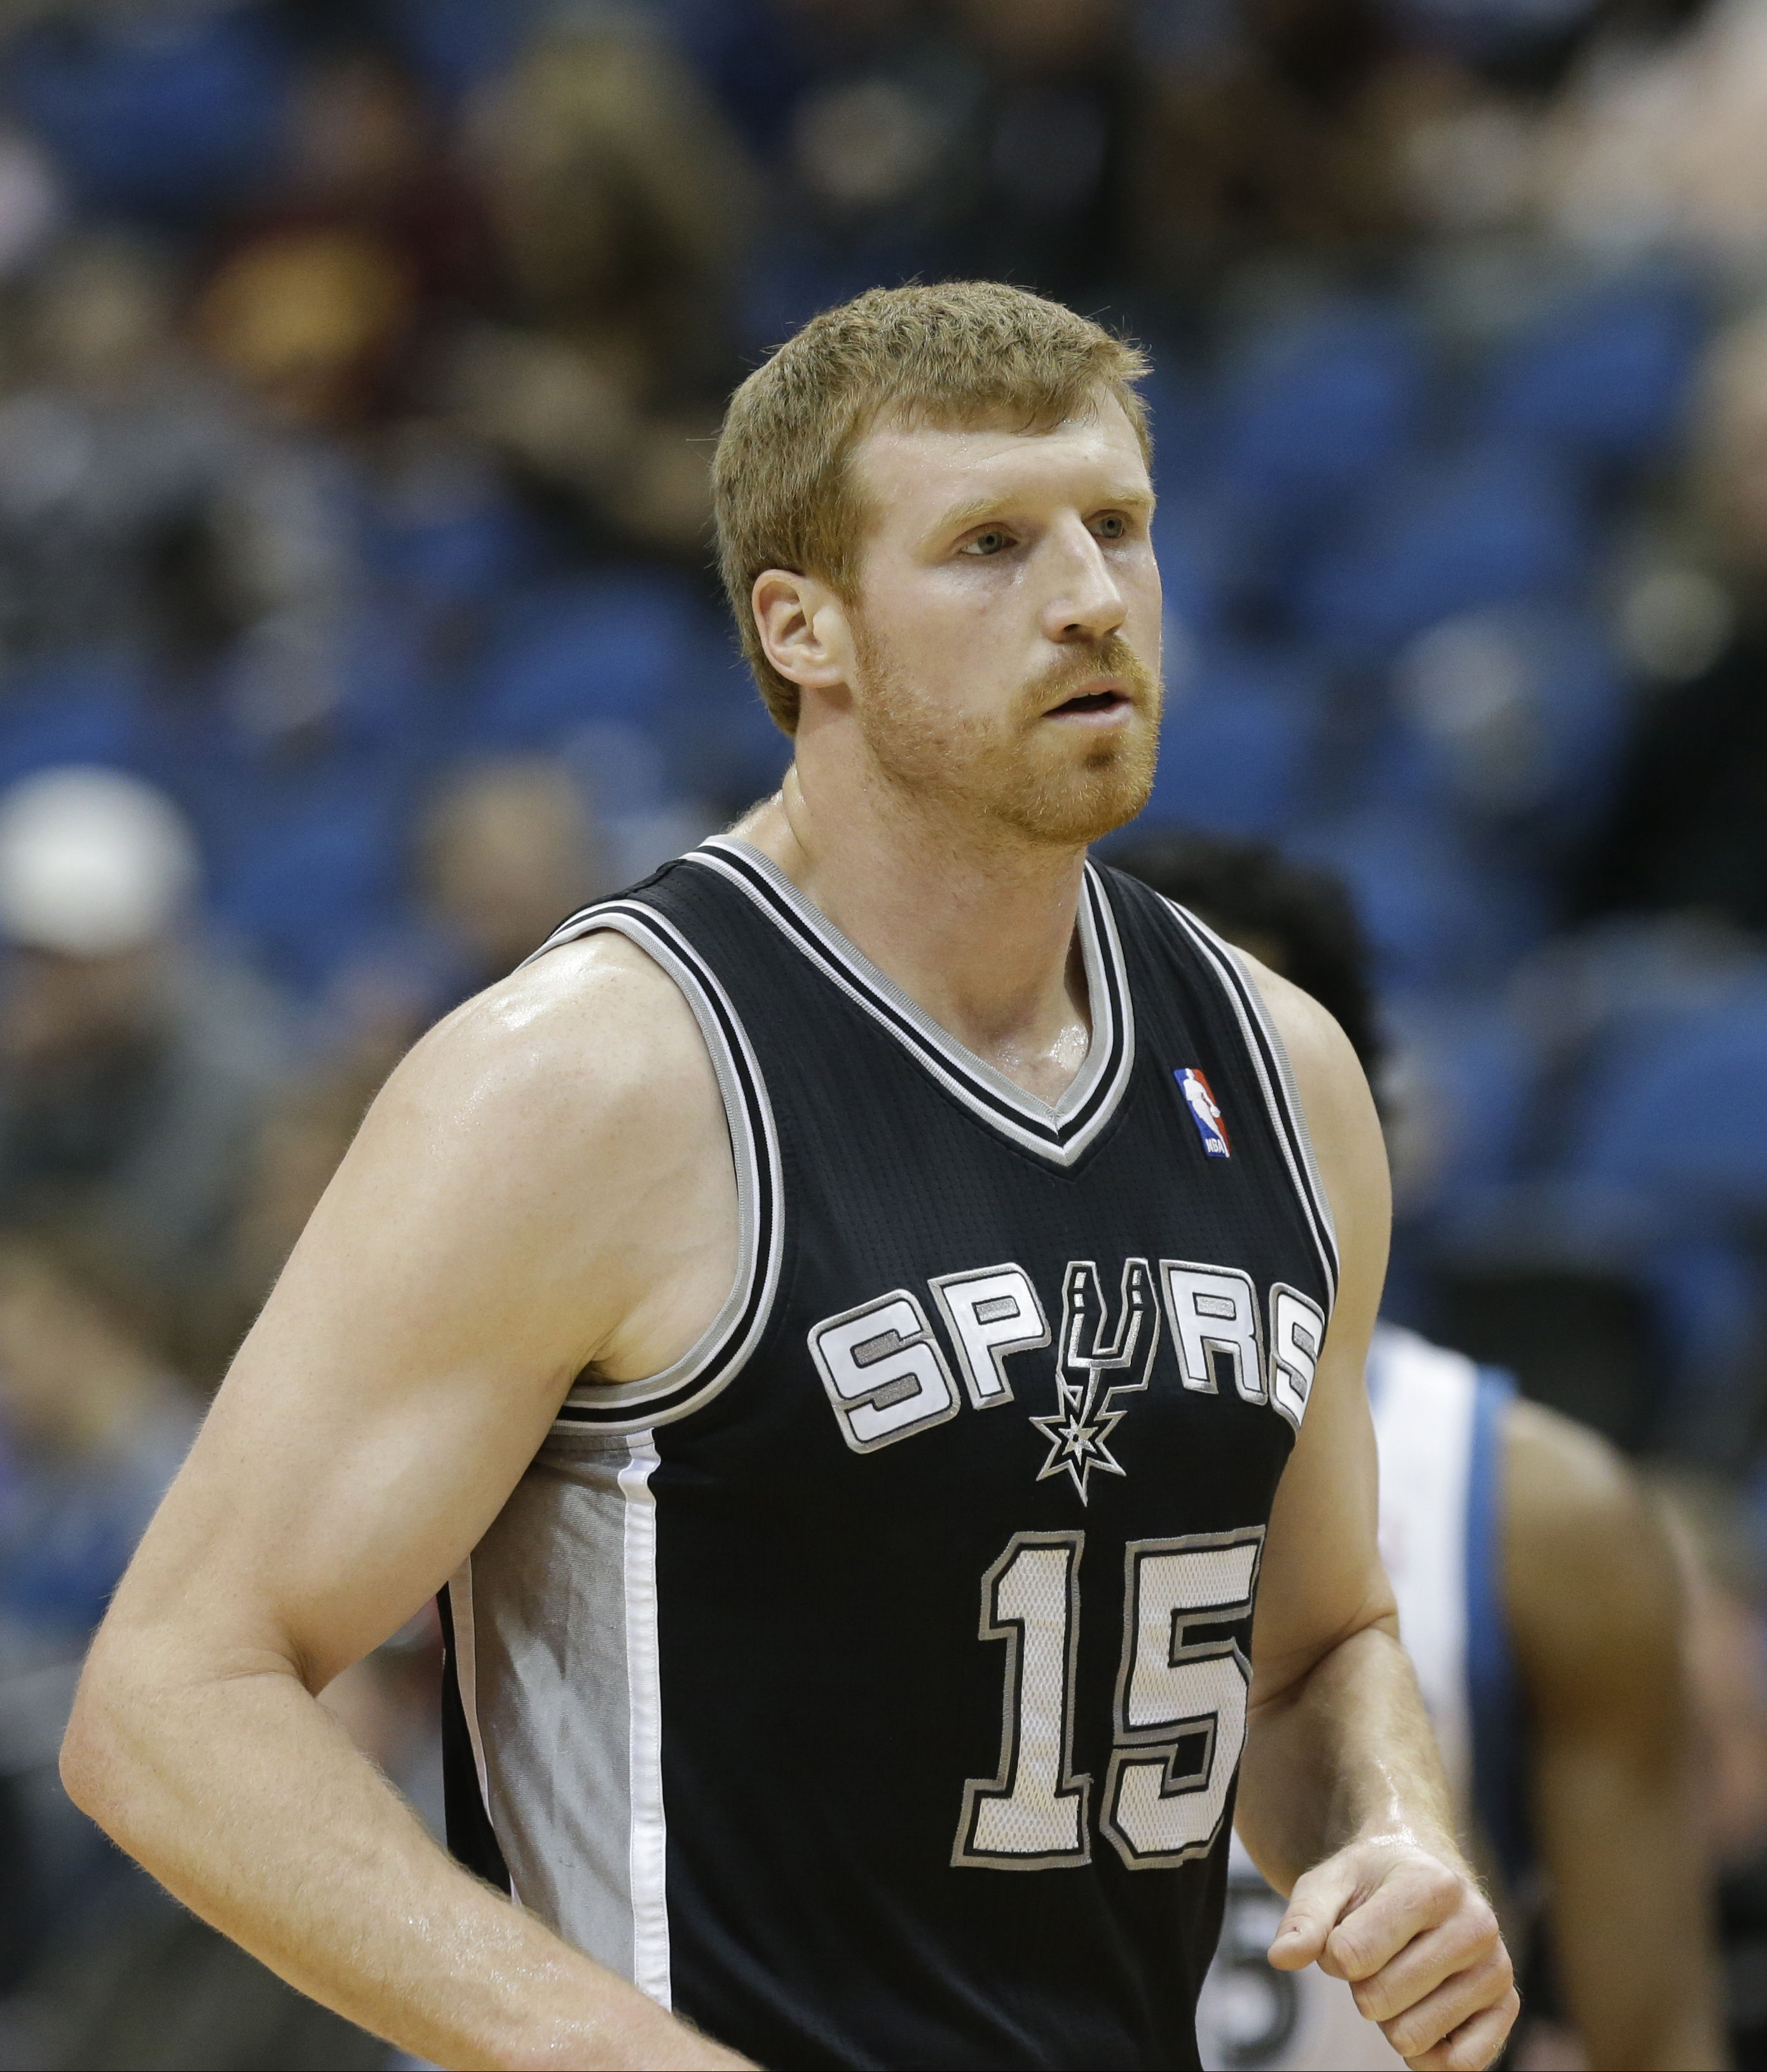 San Antonio Spurs' Matt Bonner is shown in the first half of an NBA basketball game against the Minnesota Timberwolves on March 12, 2013, in Minneapolis. (Jim Mone—AP)